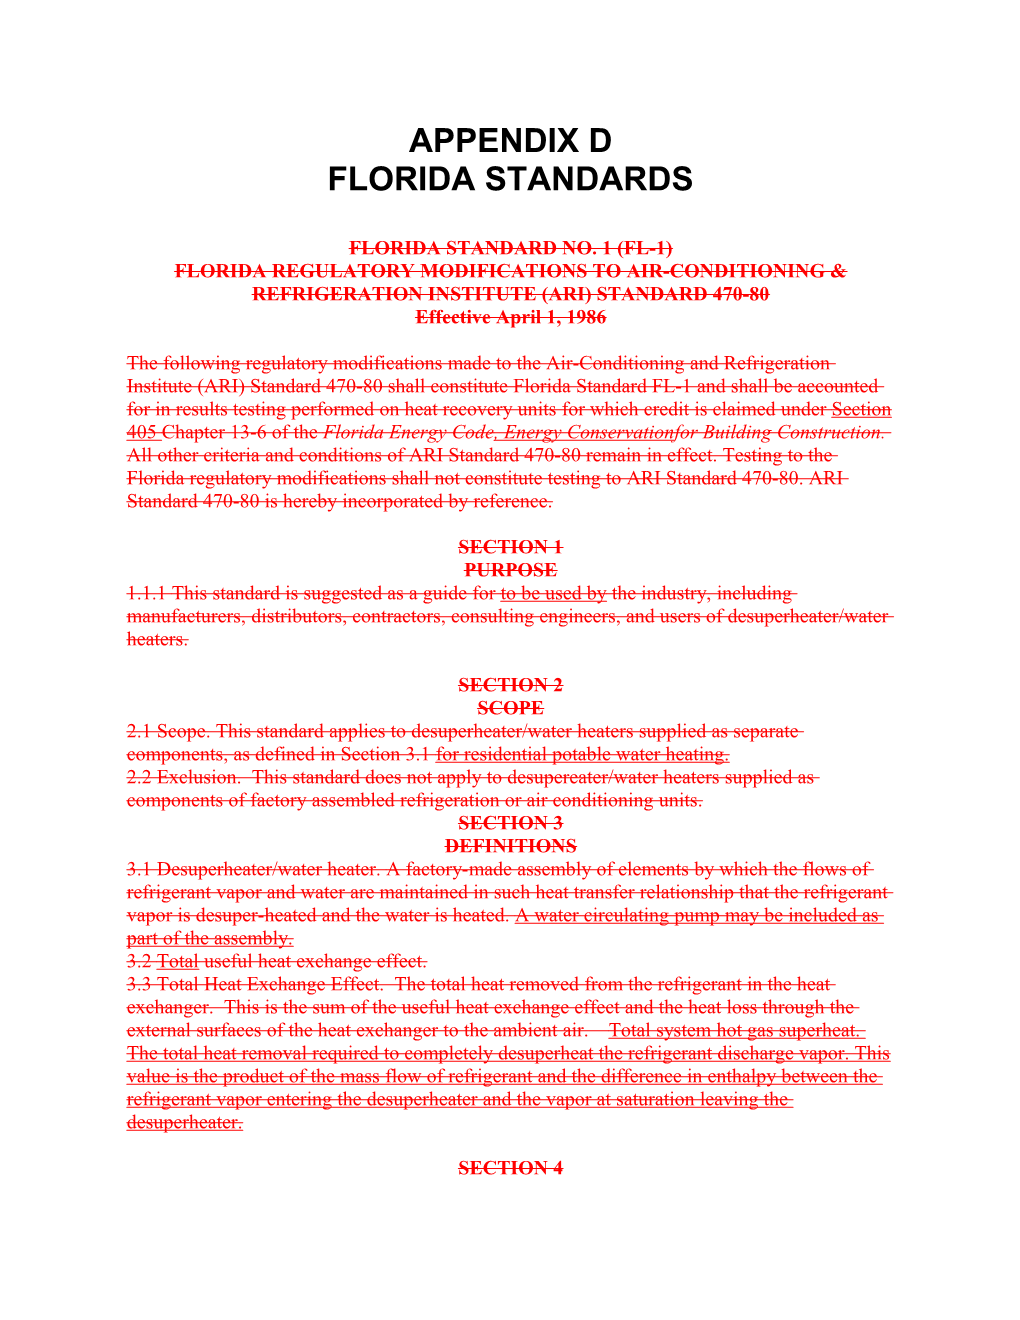 Florida Regulatory Modifications to Air-Conditioning & s1